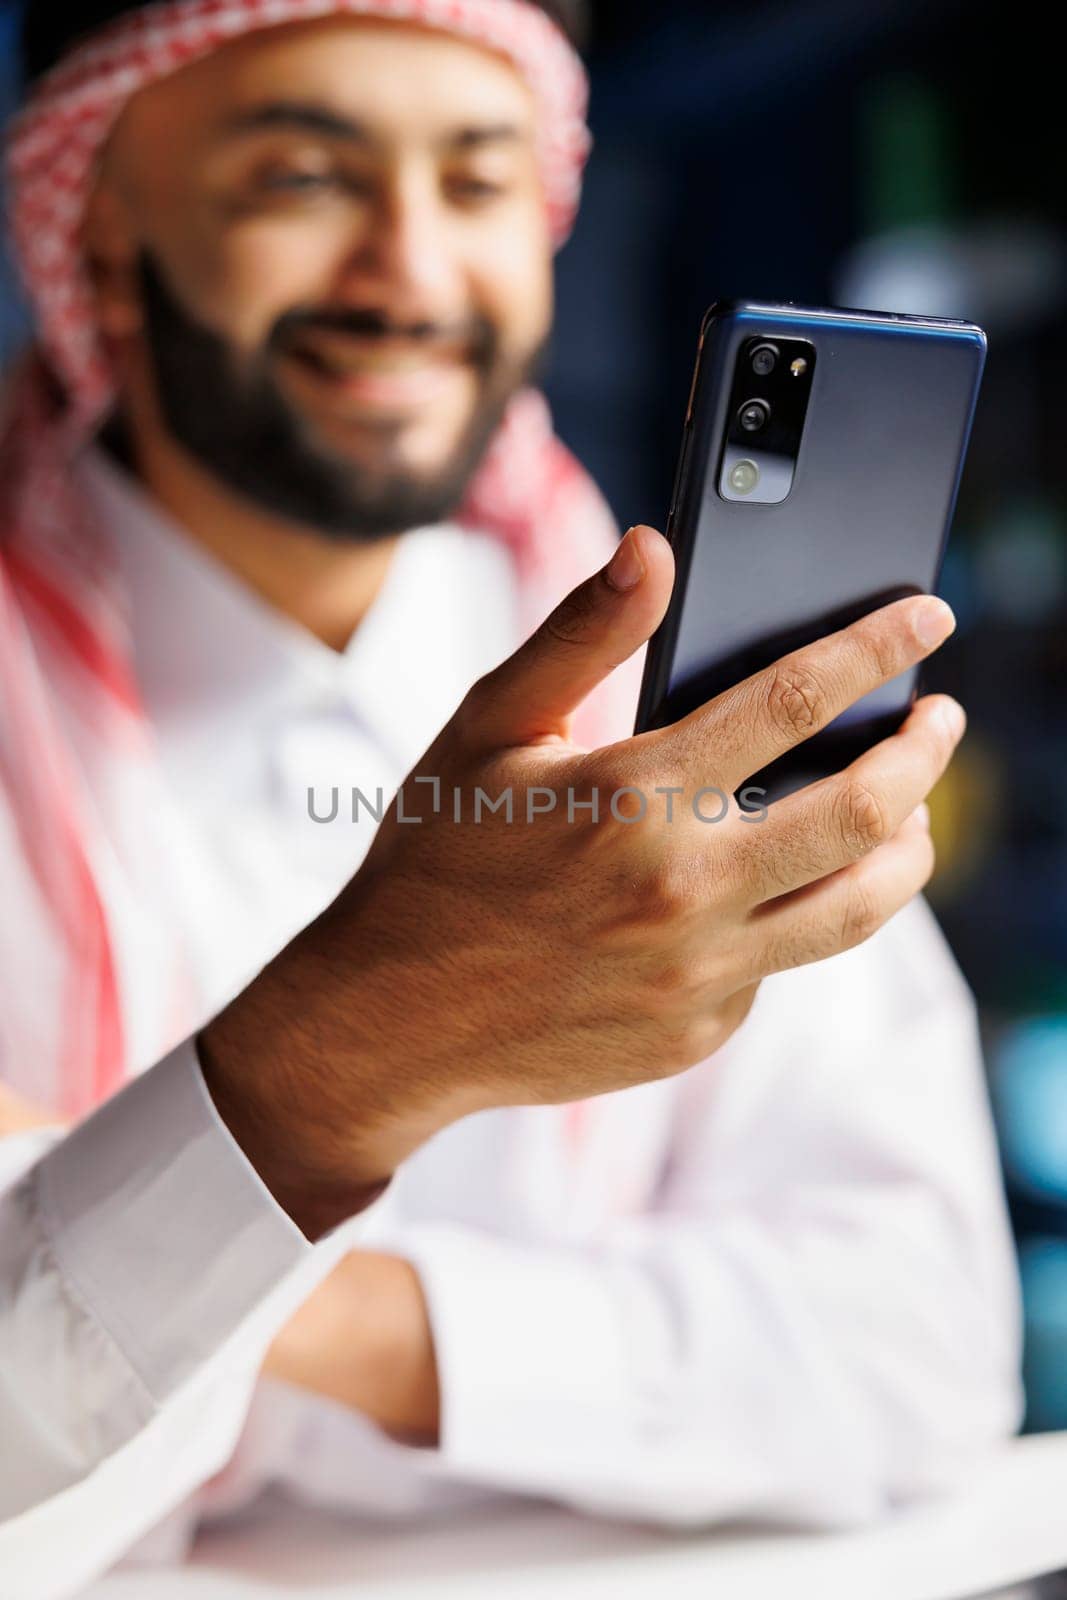 Middle Eastern entrepreneur in traditional clothing sits at a modern desk, browsing the internet on his cell phone. With a smile, an Islamic man uses wireless technology for work. Close-up shot.